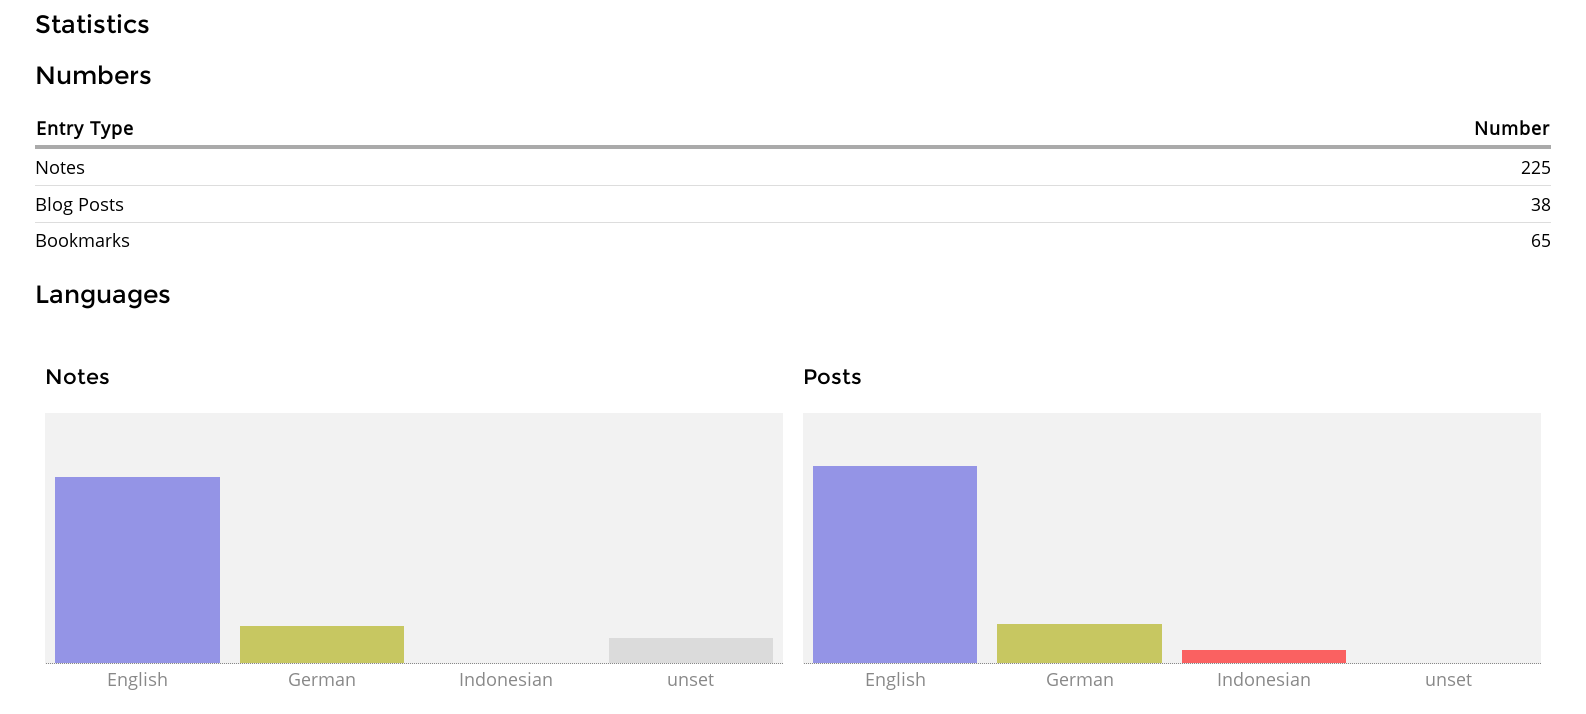 Types of post sorted by the language used therein, visualized using a bar chart